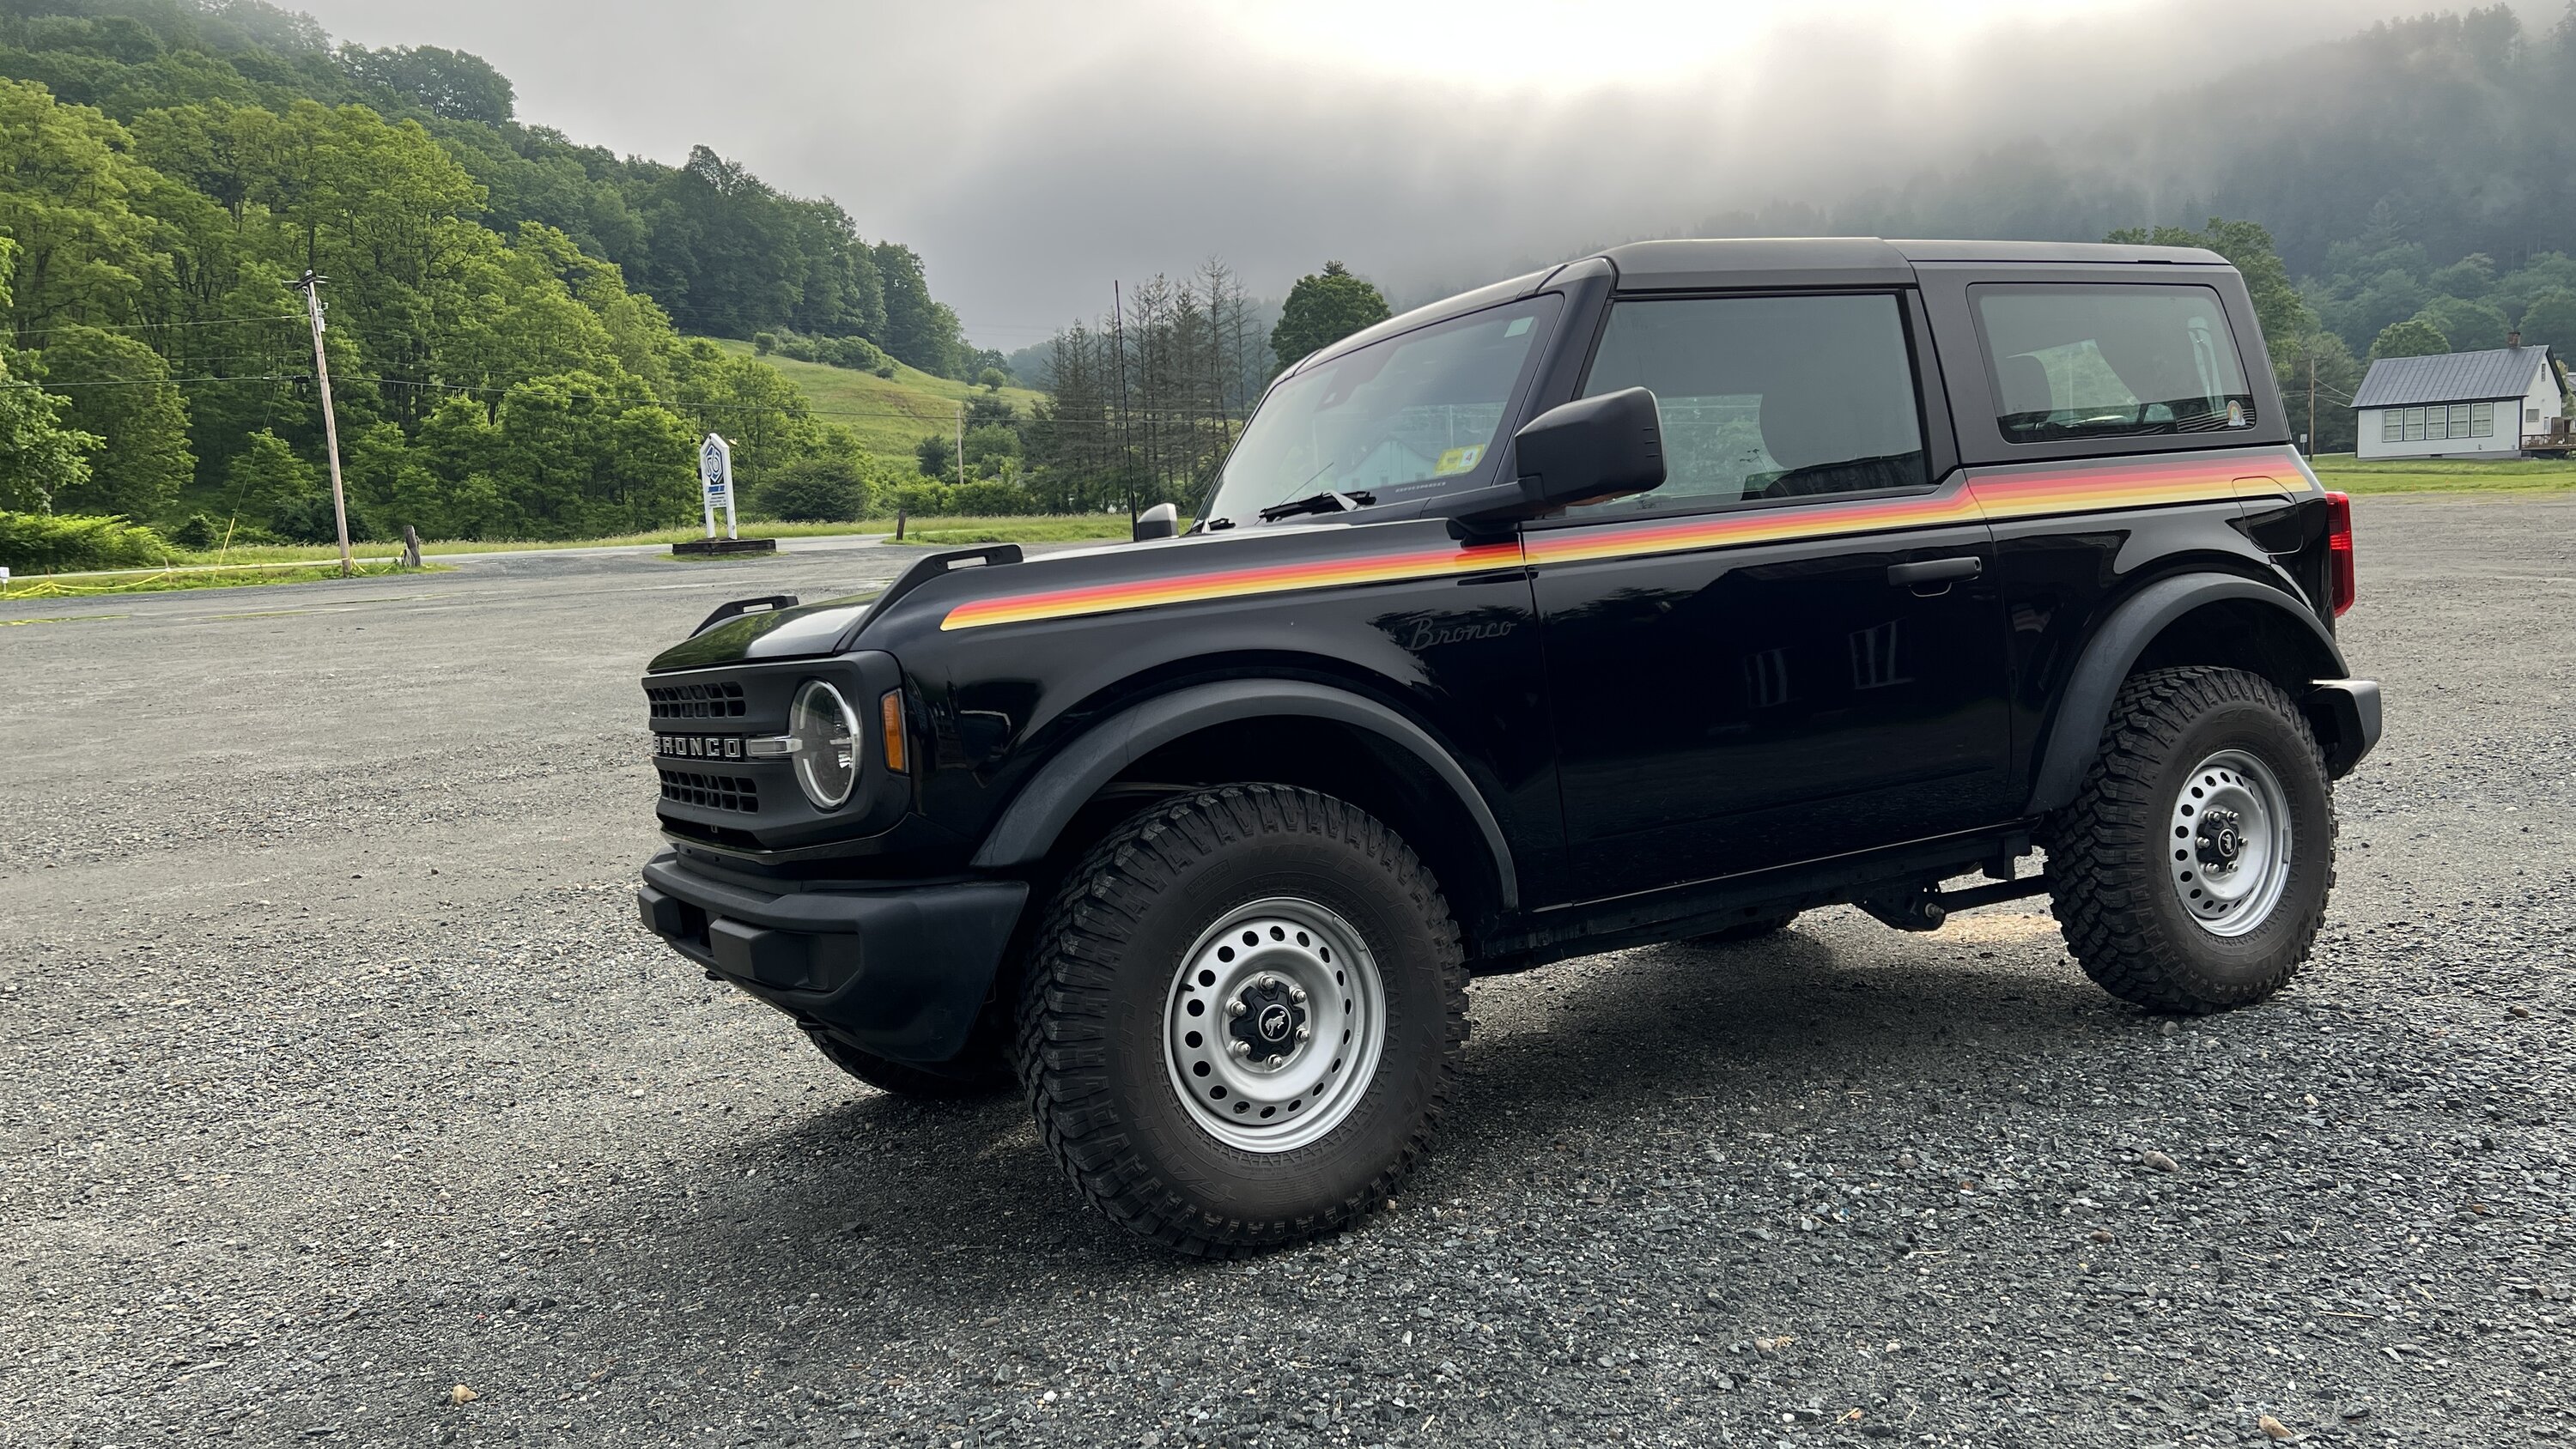 Ford Bronco Show 33's some love picture thread 83C00031-7893-416F-8A49-8B18475A66C4_1_201_a